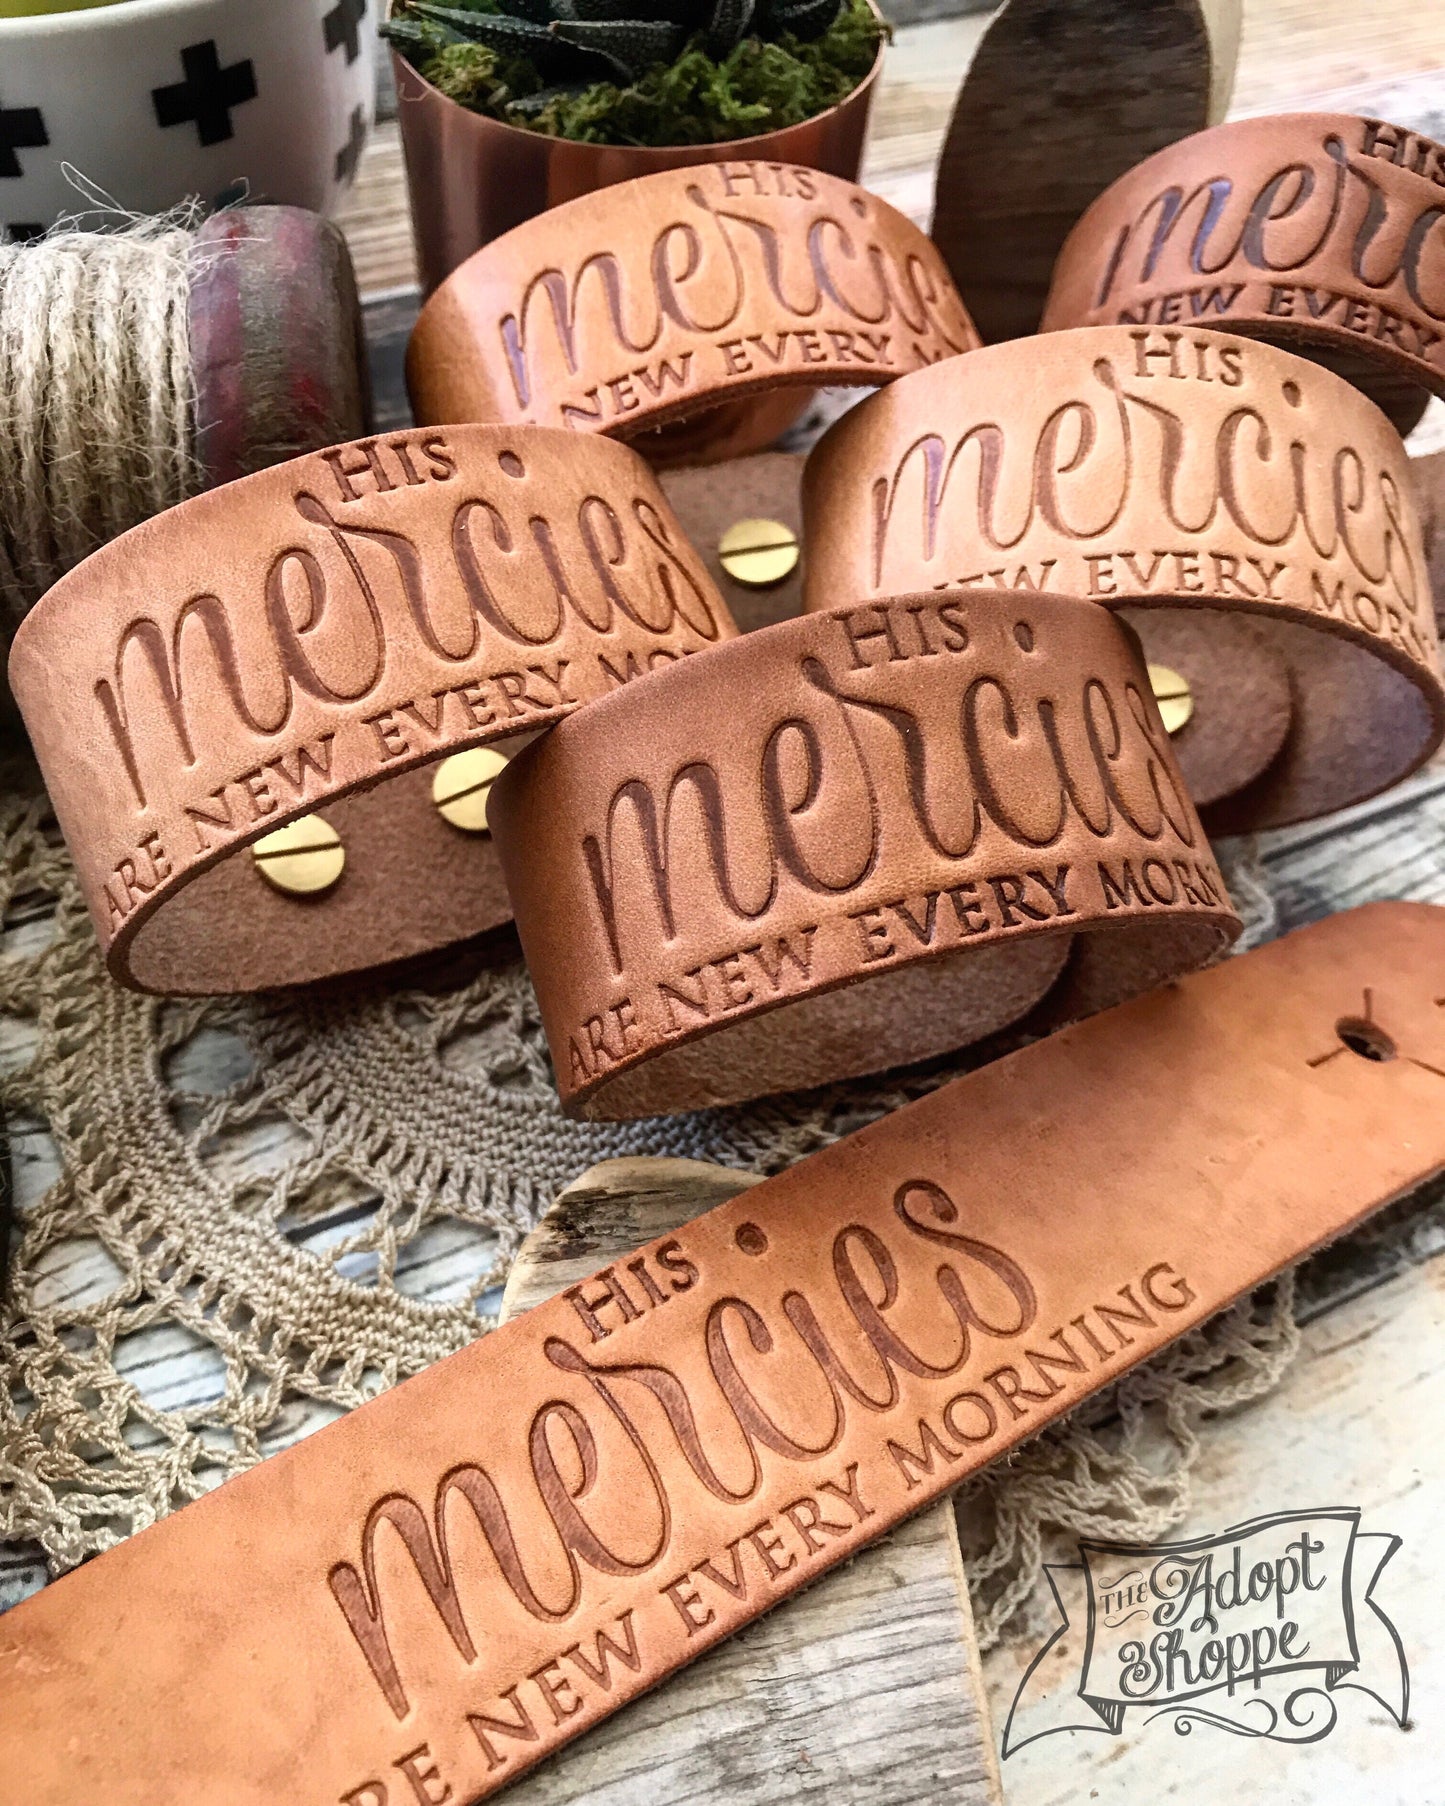 His mercies are new every morning (camel/natural) leather cuff